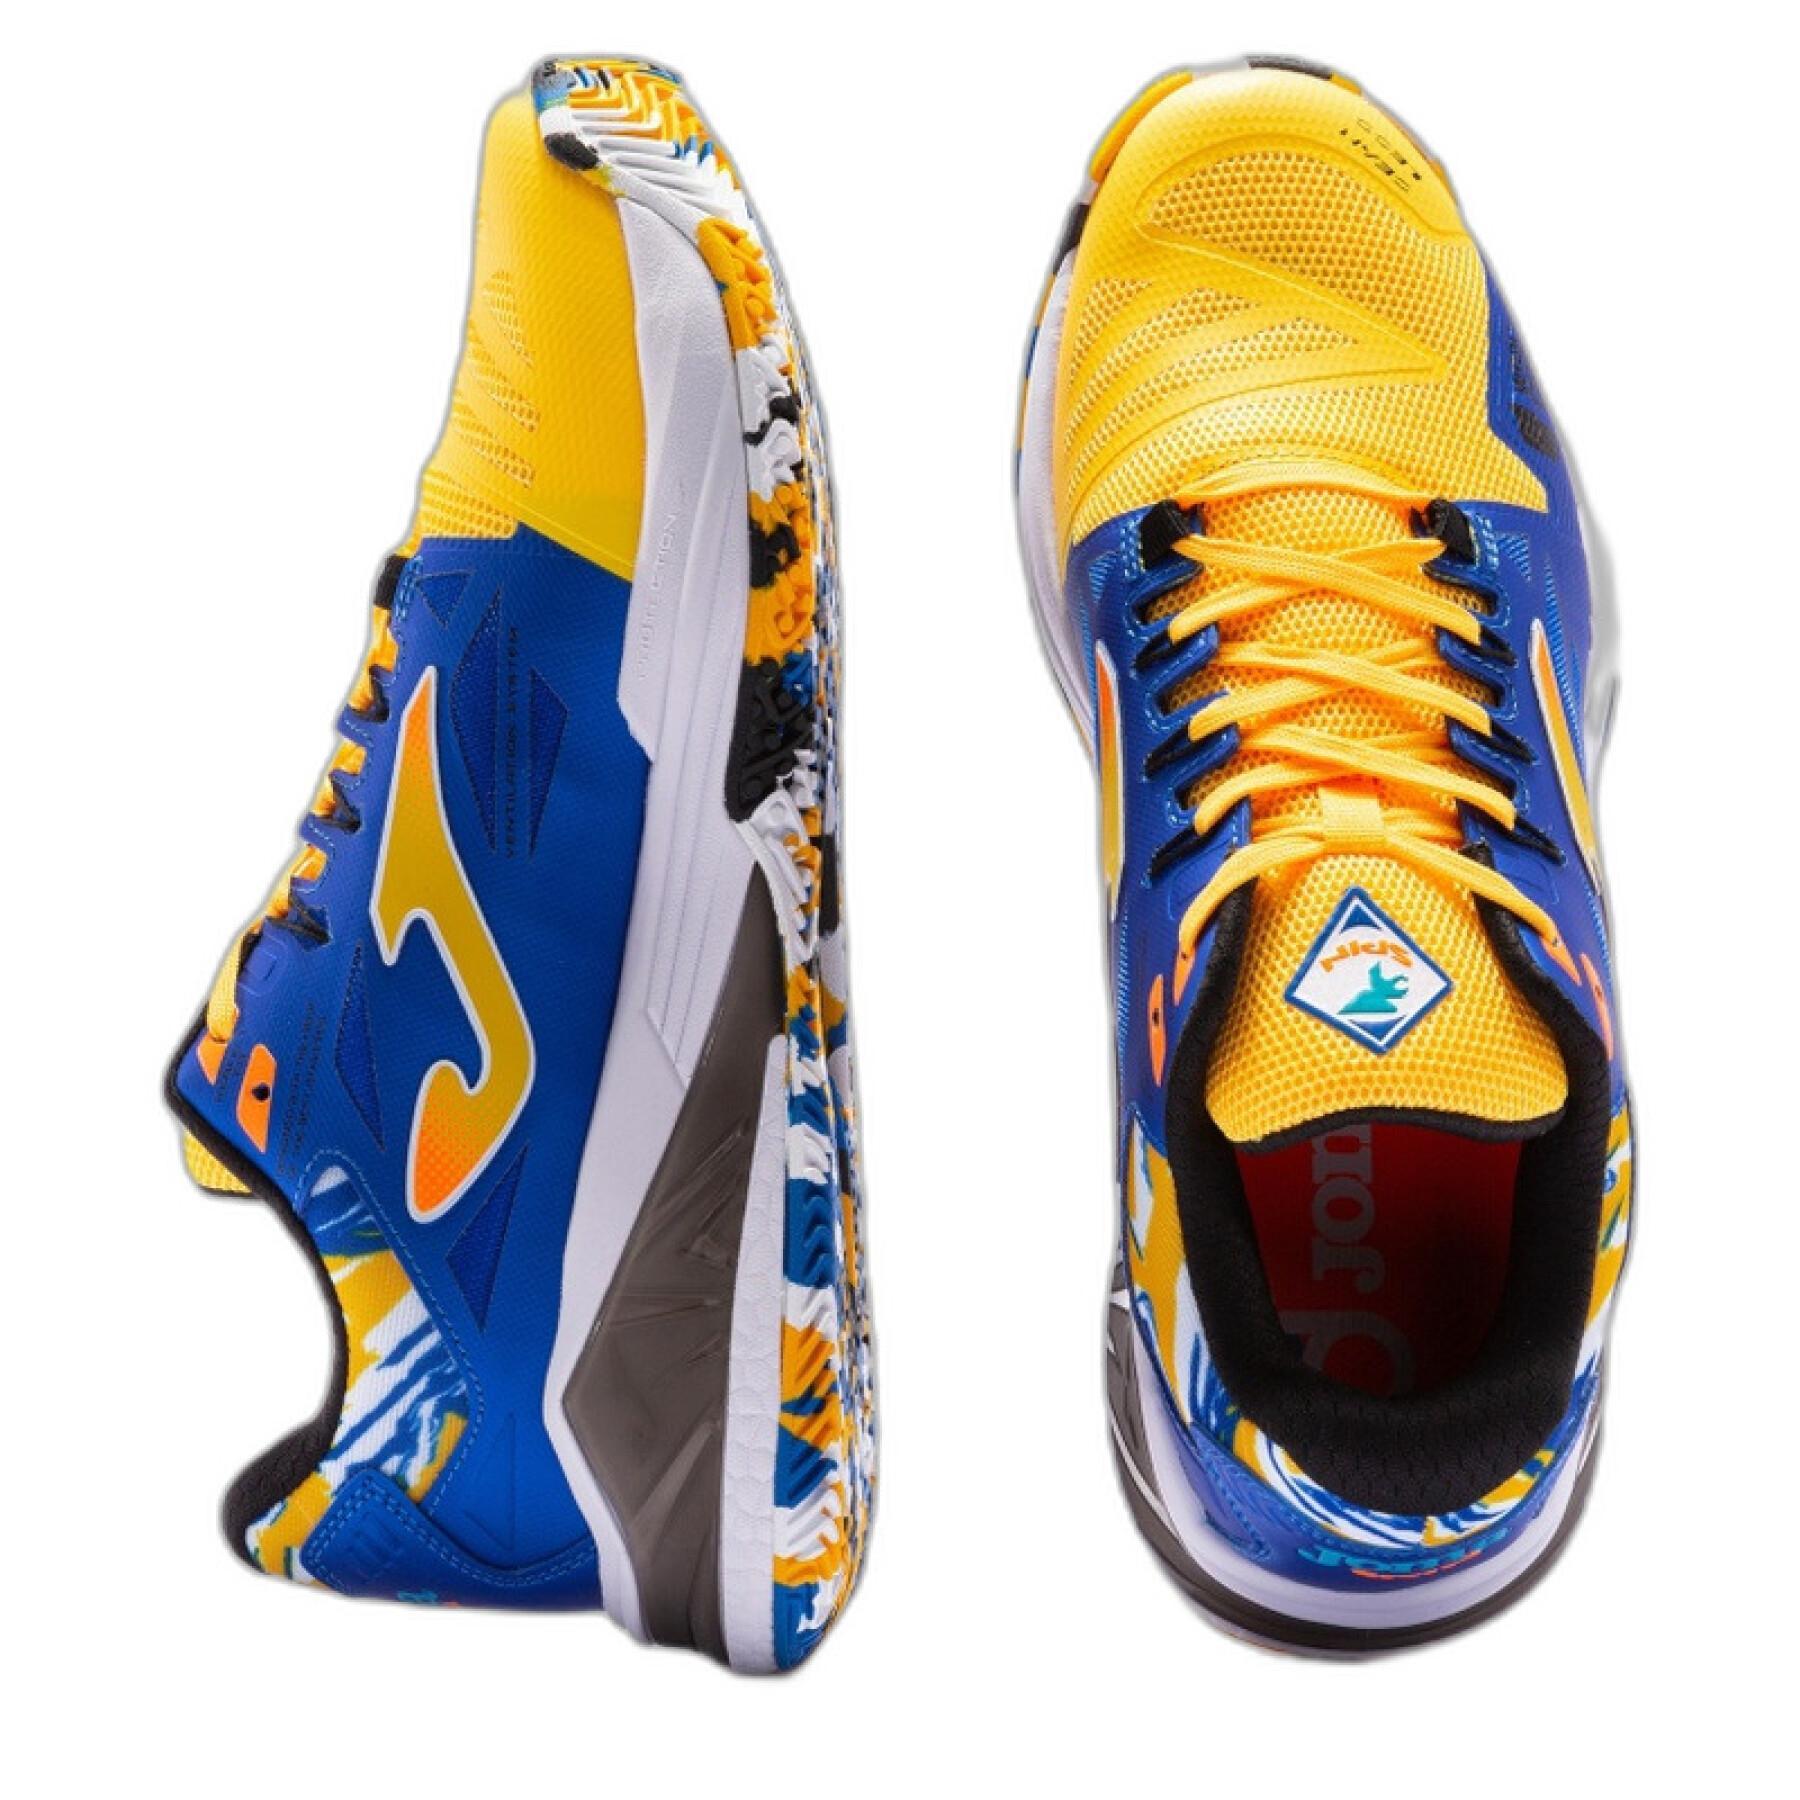 Padel shoes Joma T.Spin 2308